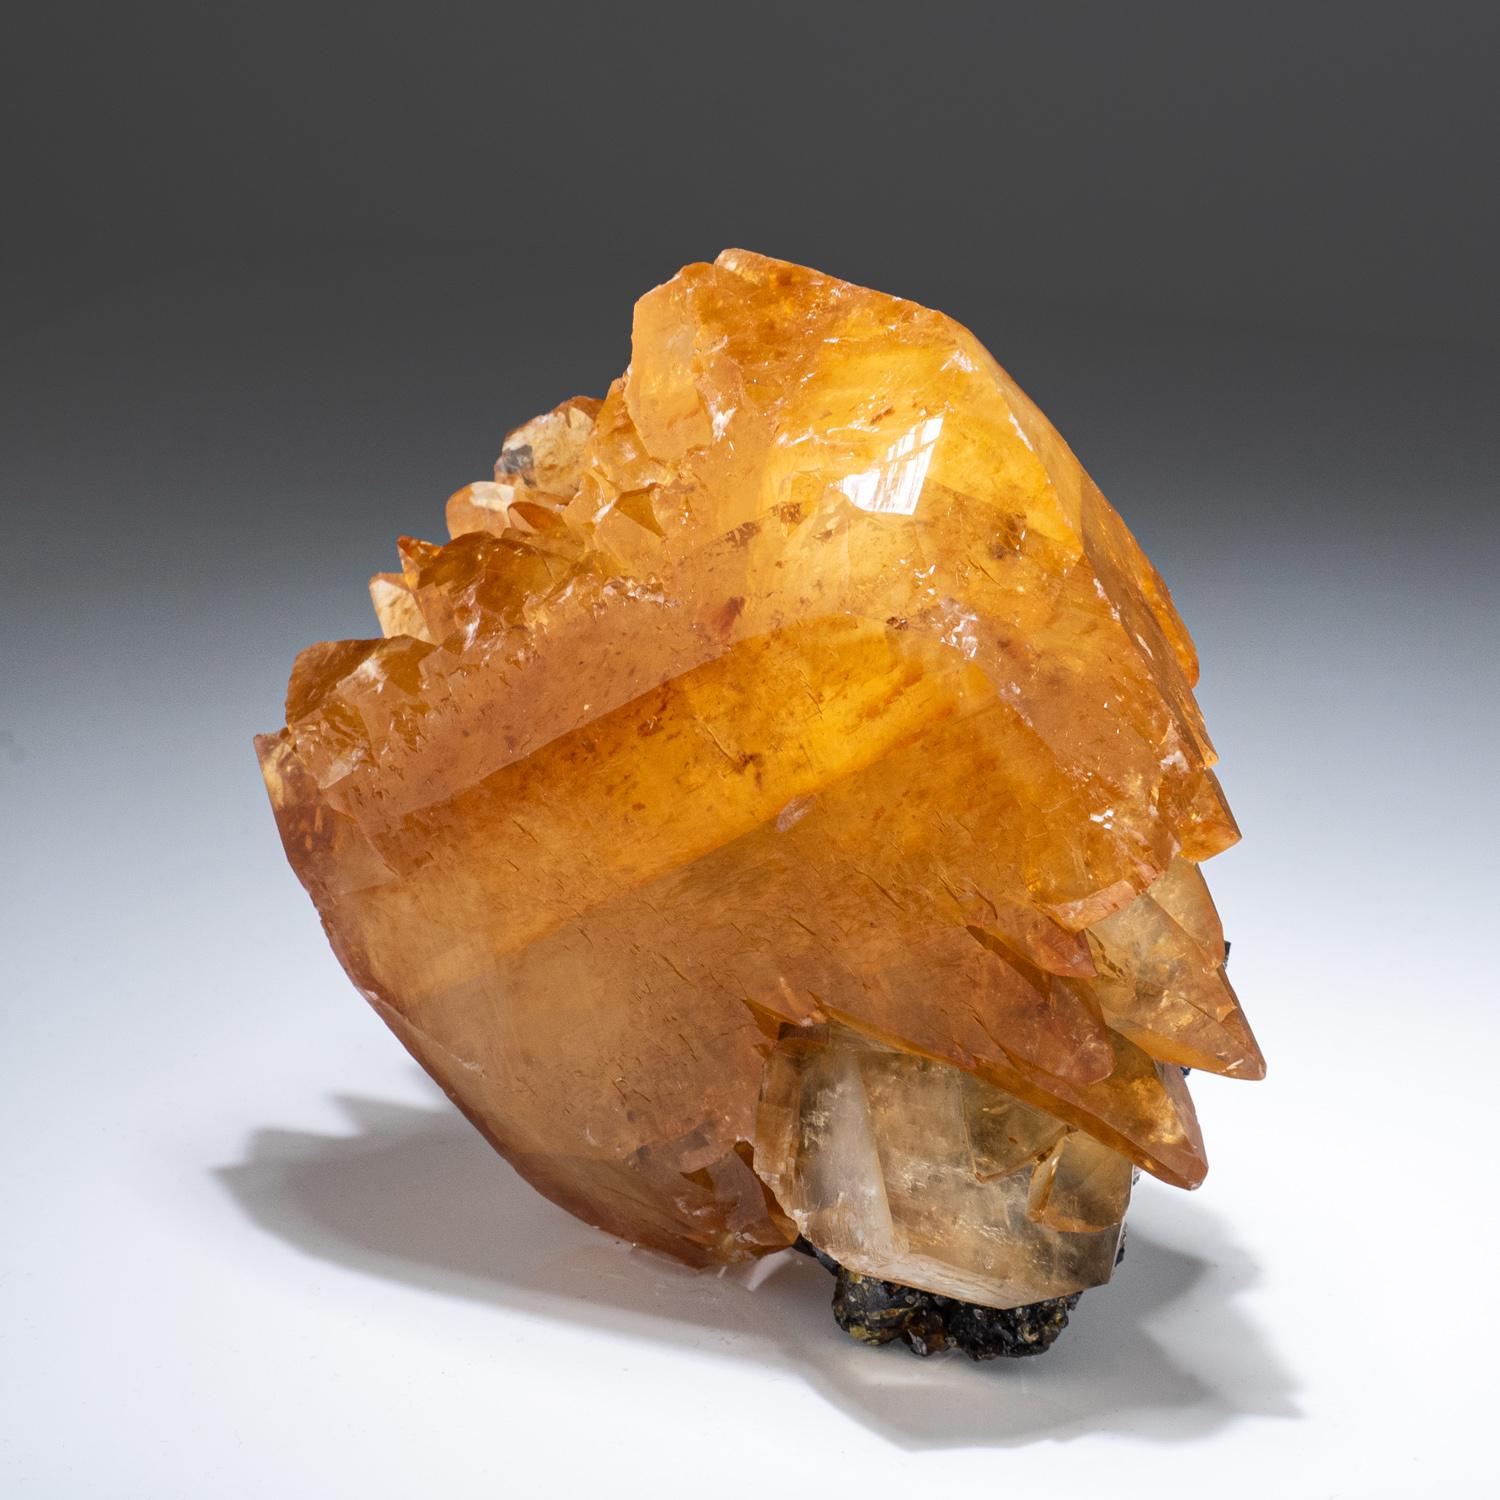 Lustrous transparent deep golden calcite crystal on matrix. Large double terminated scalenohedral twinned on the C-axis with well defined re-entrant faces. Small sphalerite crystal embedded on the back of the specimen. This rare specimen is an ideal